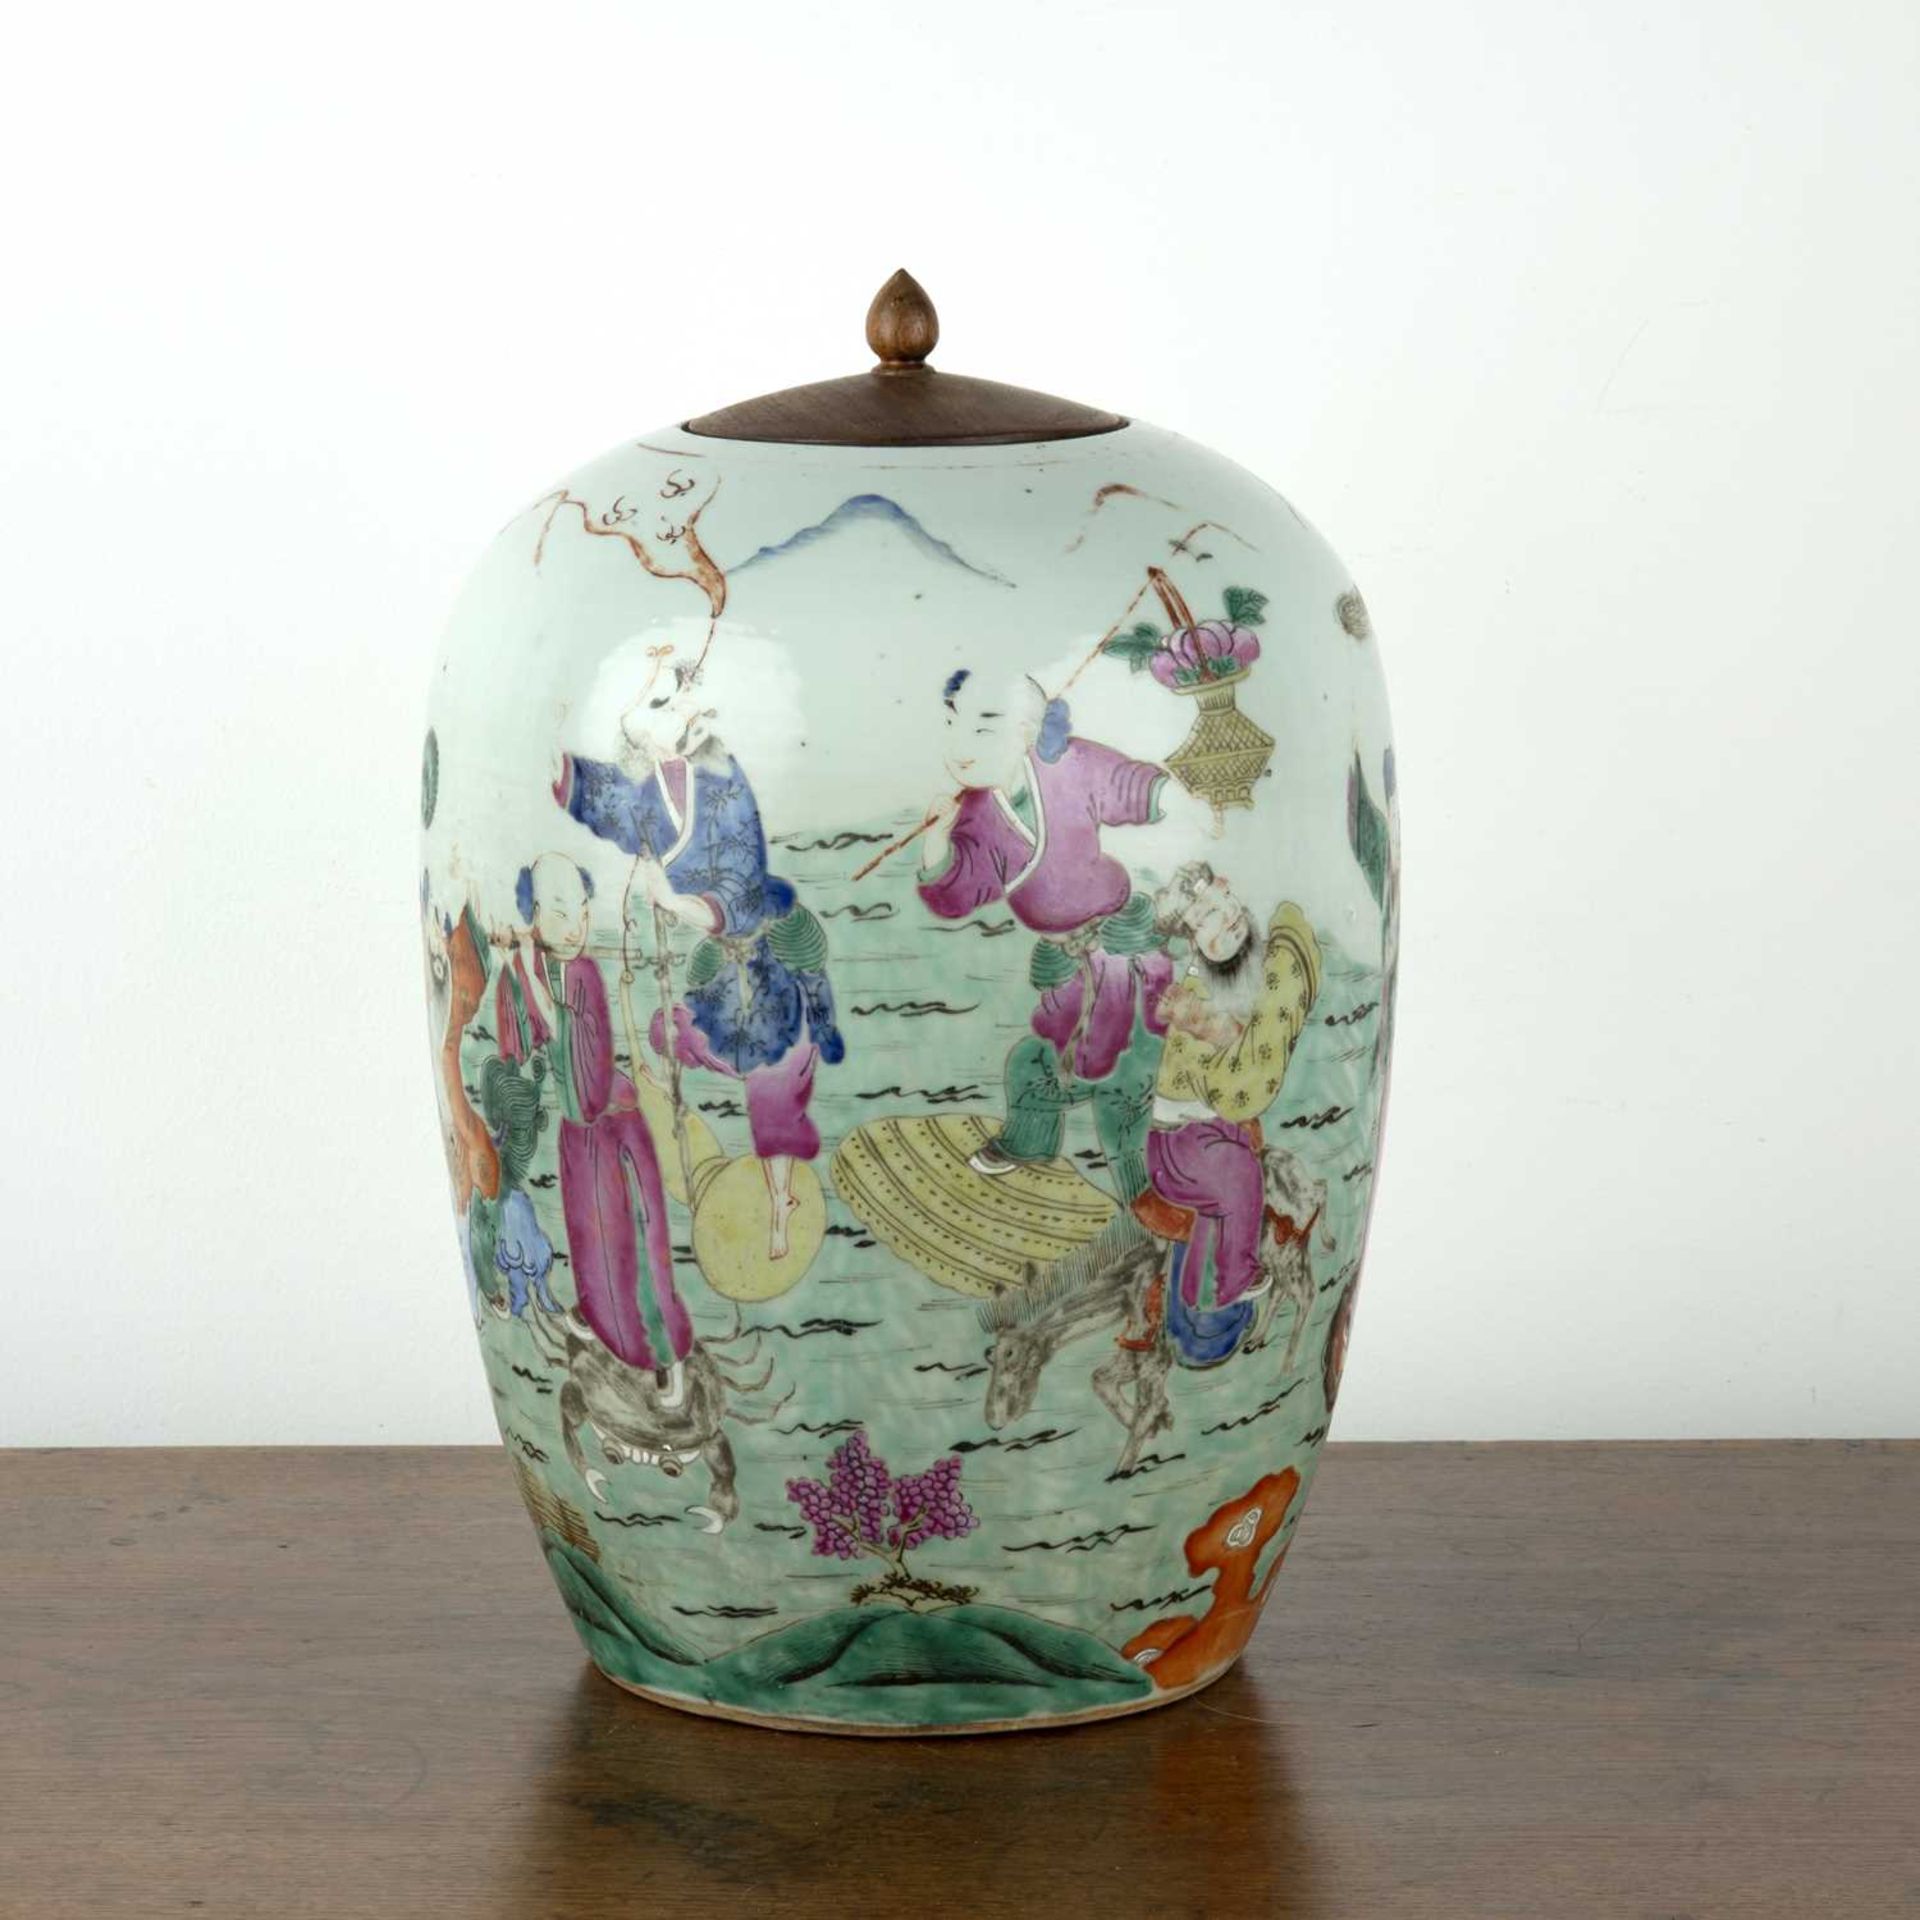 Polychrome enamelled vase and wood cover Chinese, 19th Century painted with a Lohan and further